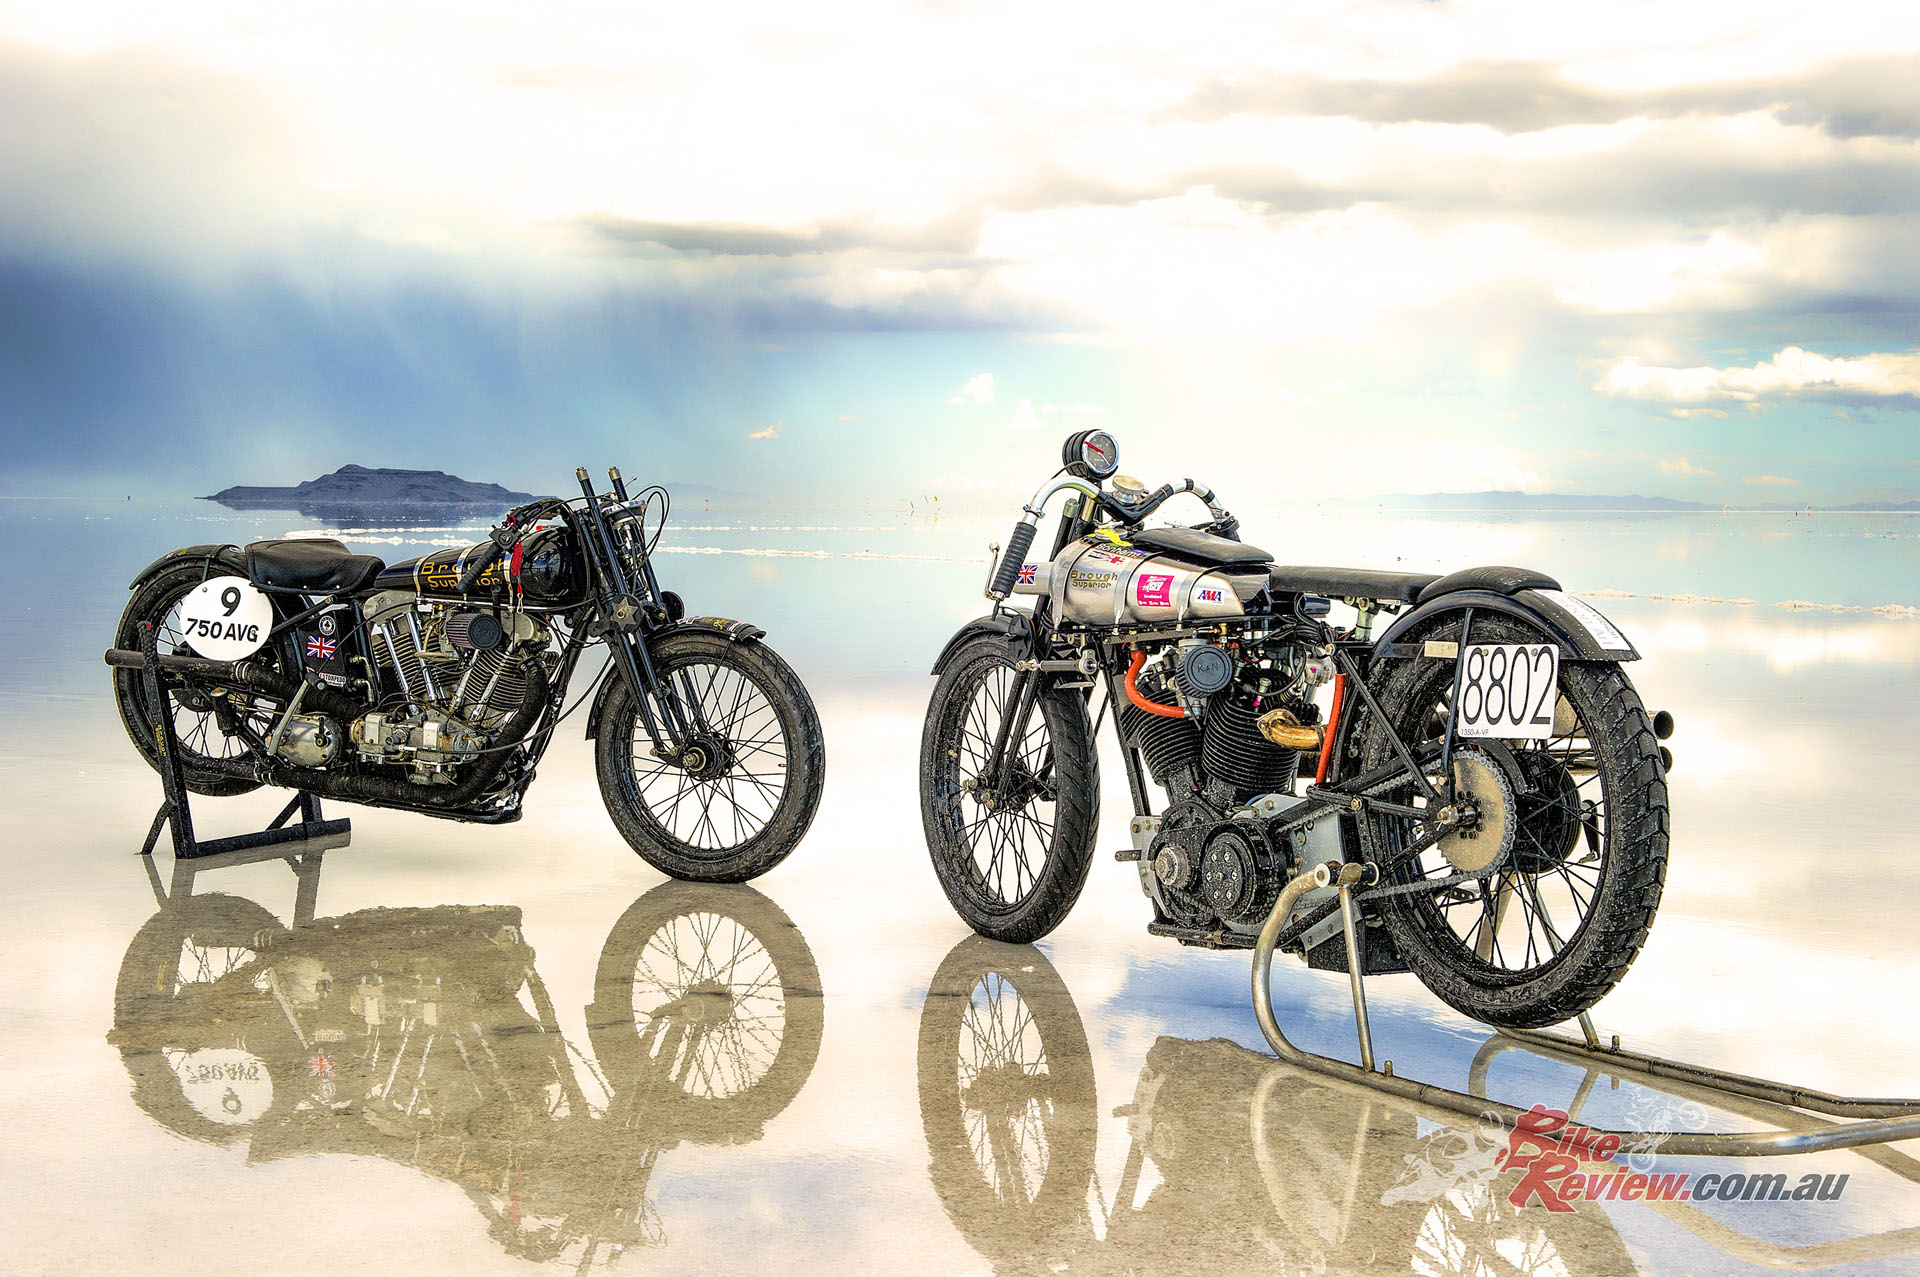 Brough Superior 750 Baby Pendine (L) with the larger engined